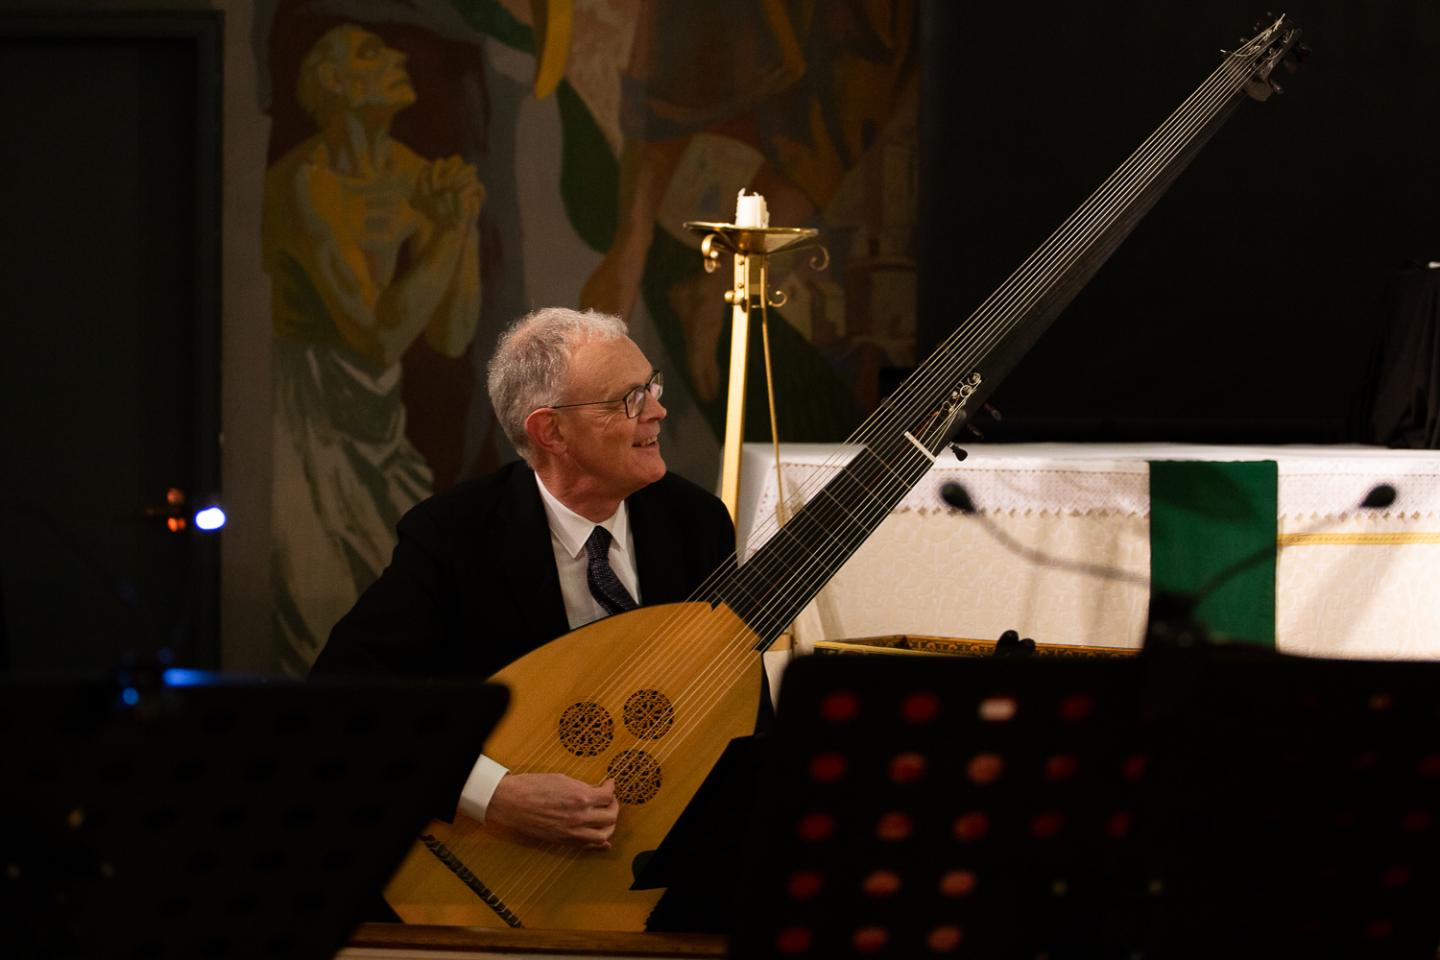 Image of a man playing a period instrument